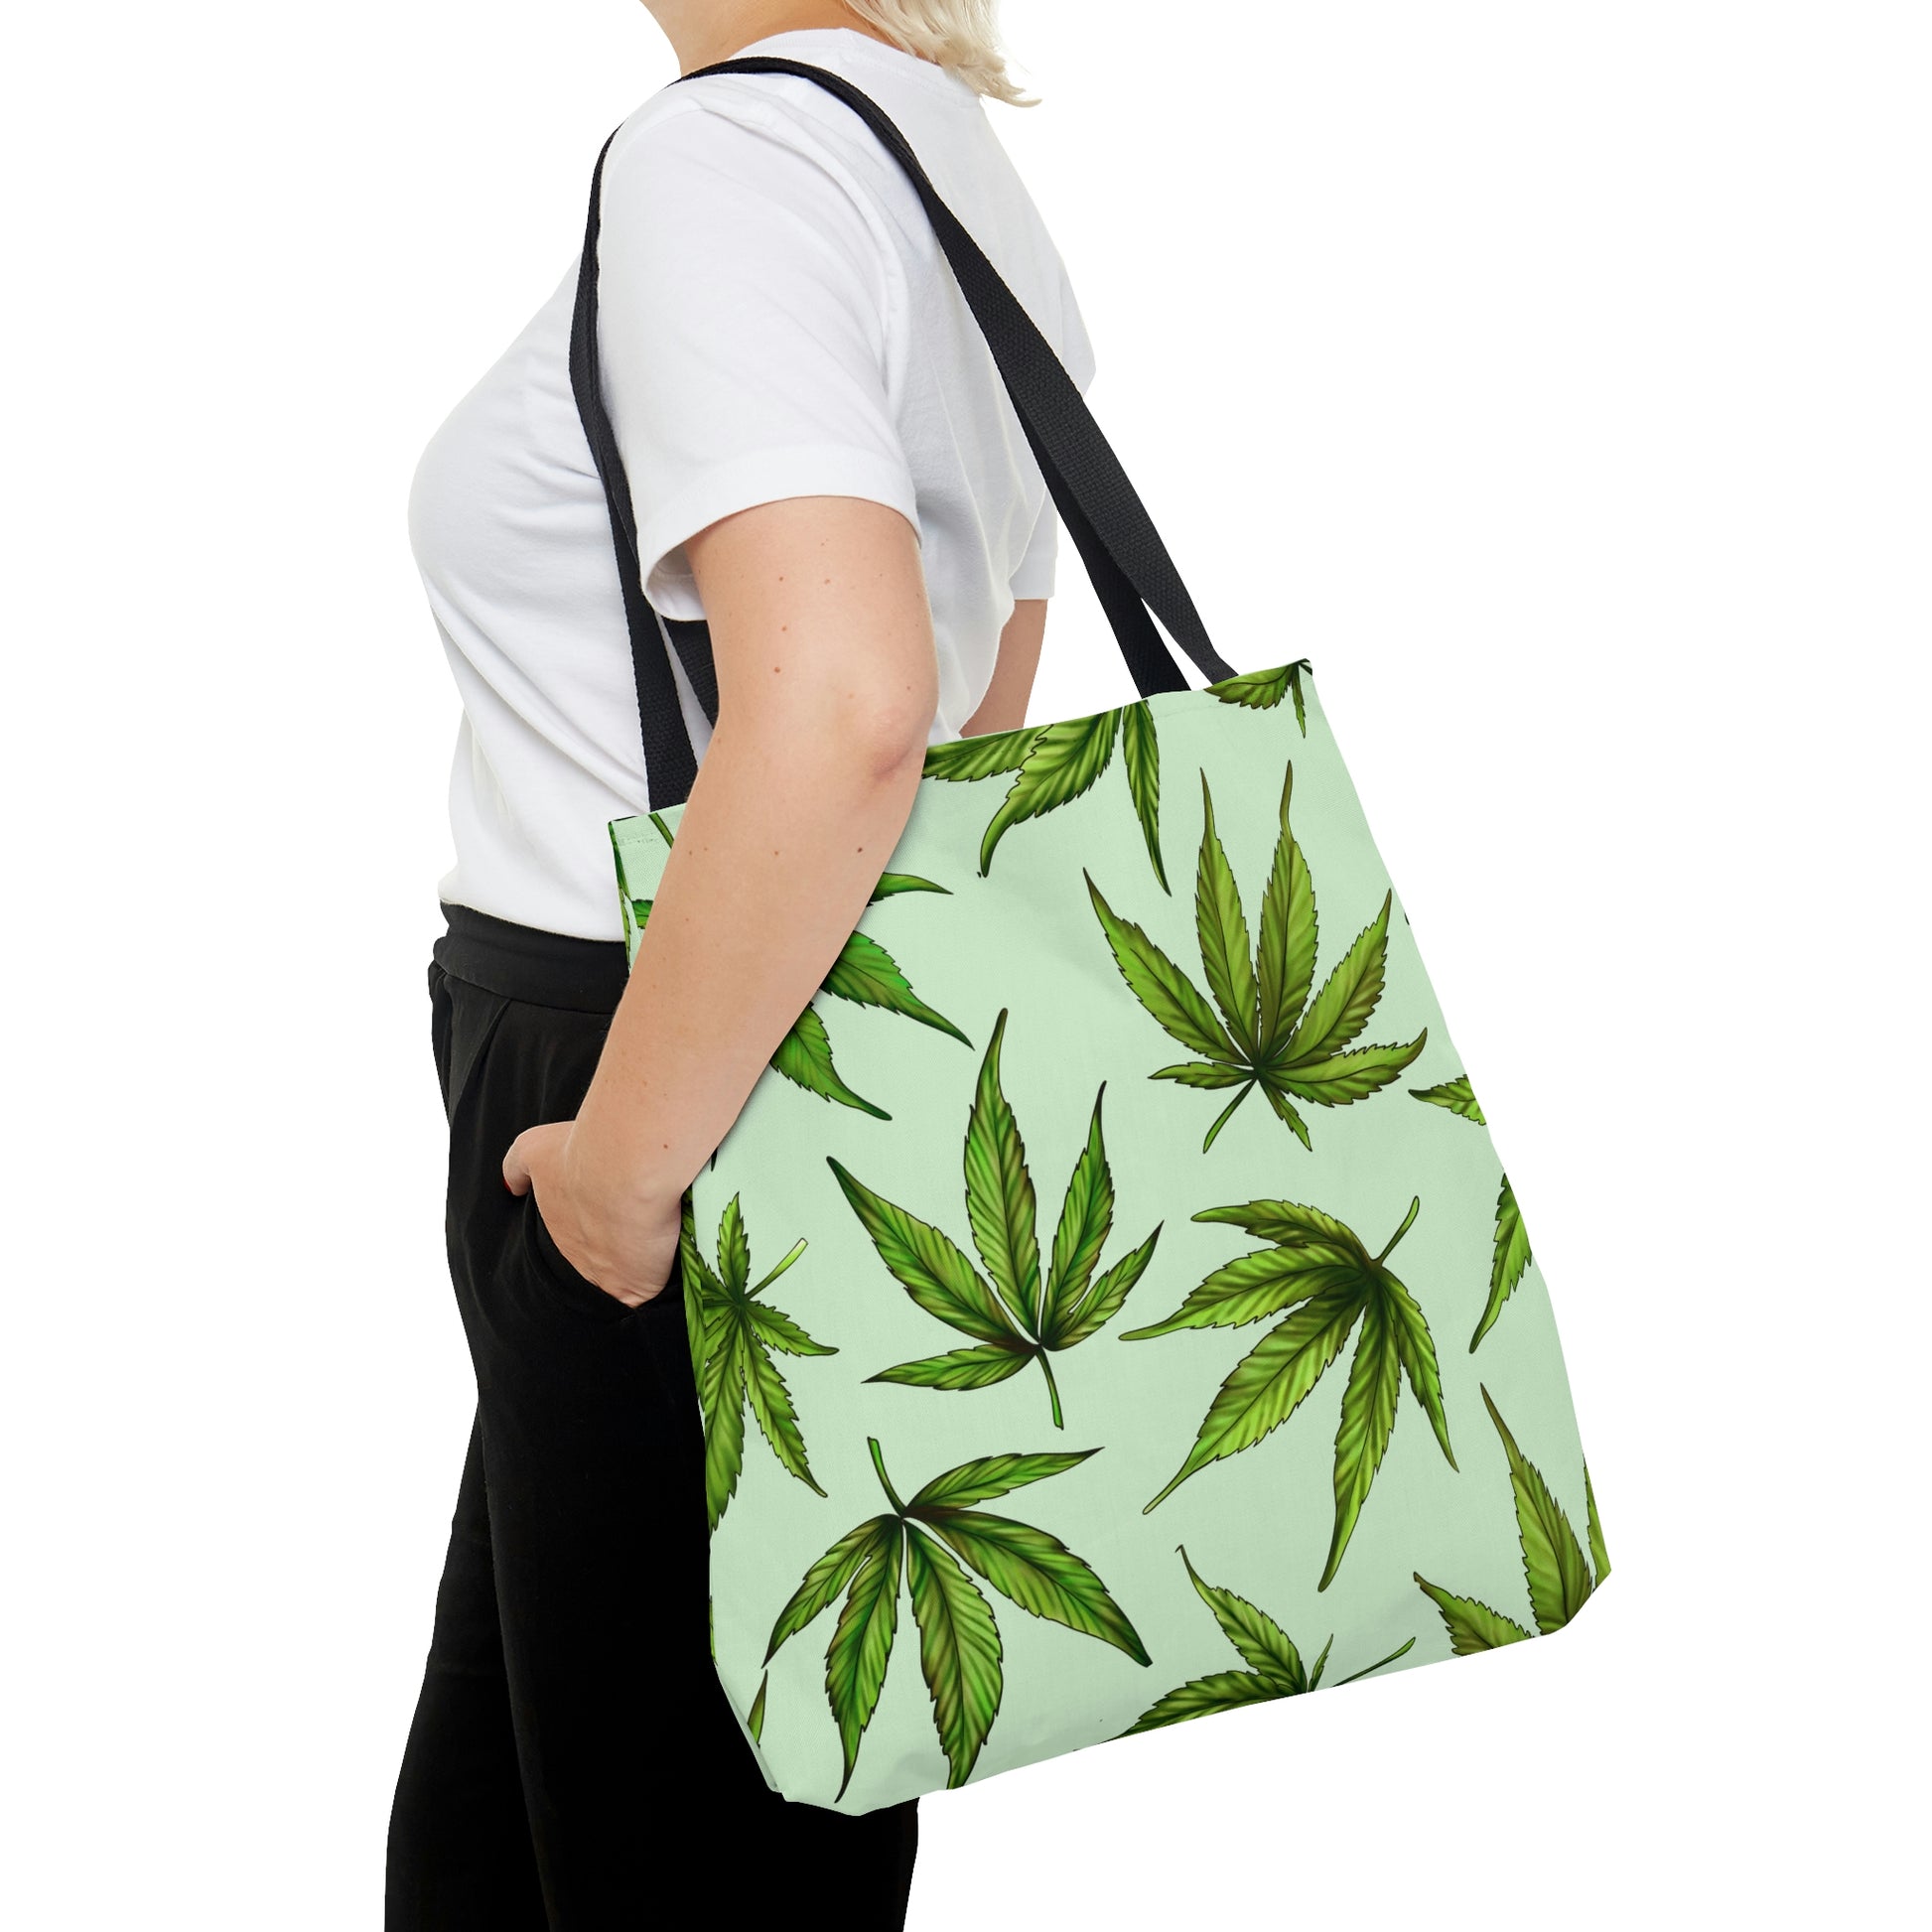 A woman with blonde hair carries the Marijuana Leaves Green Tote Bag on her left shoukder